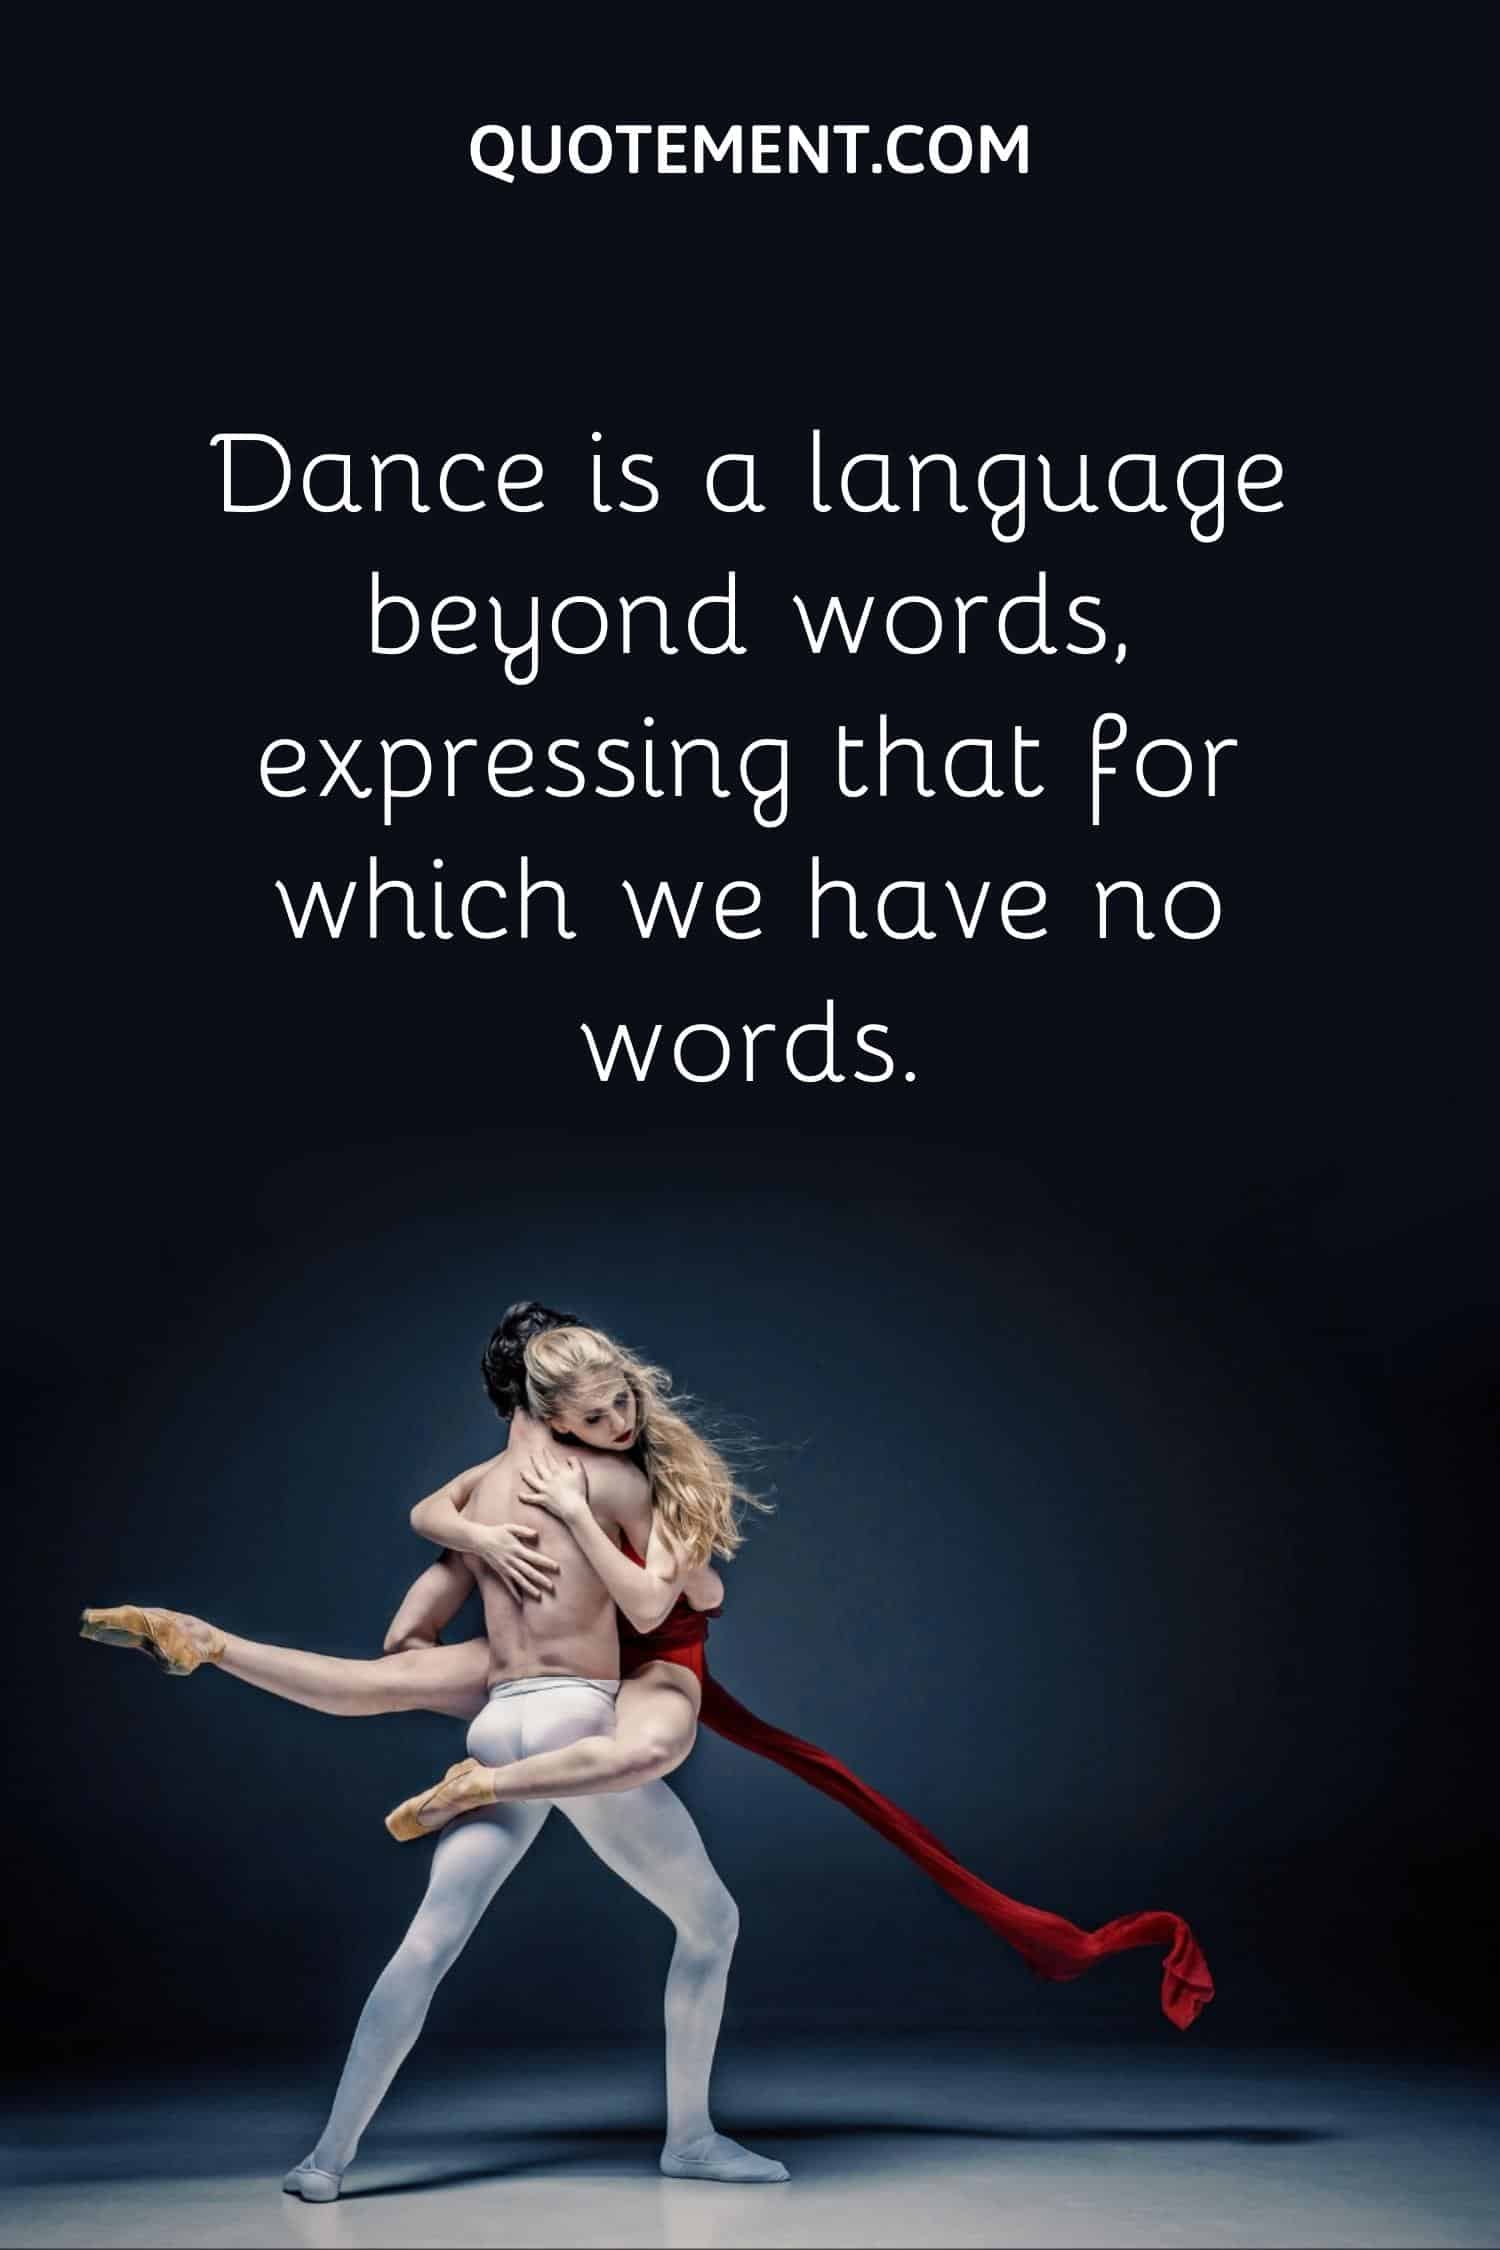 Dance is a language beyond words, expressing that for which we have no words